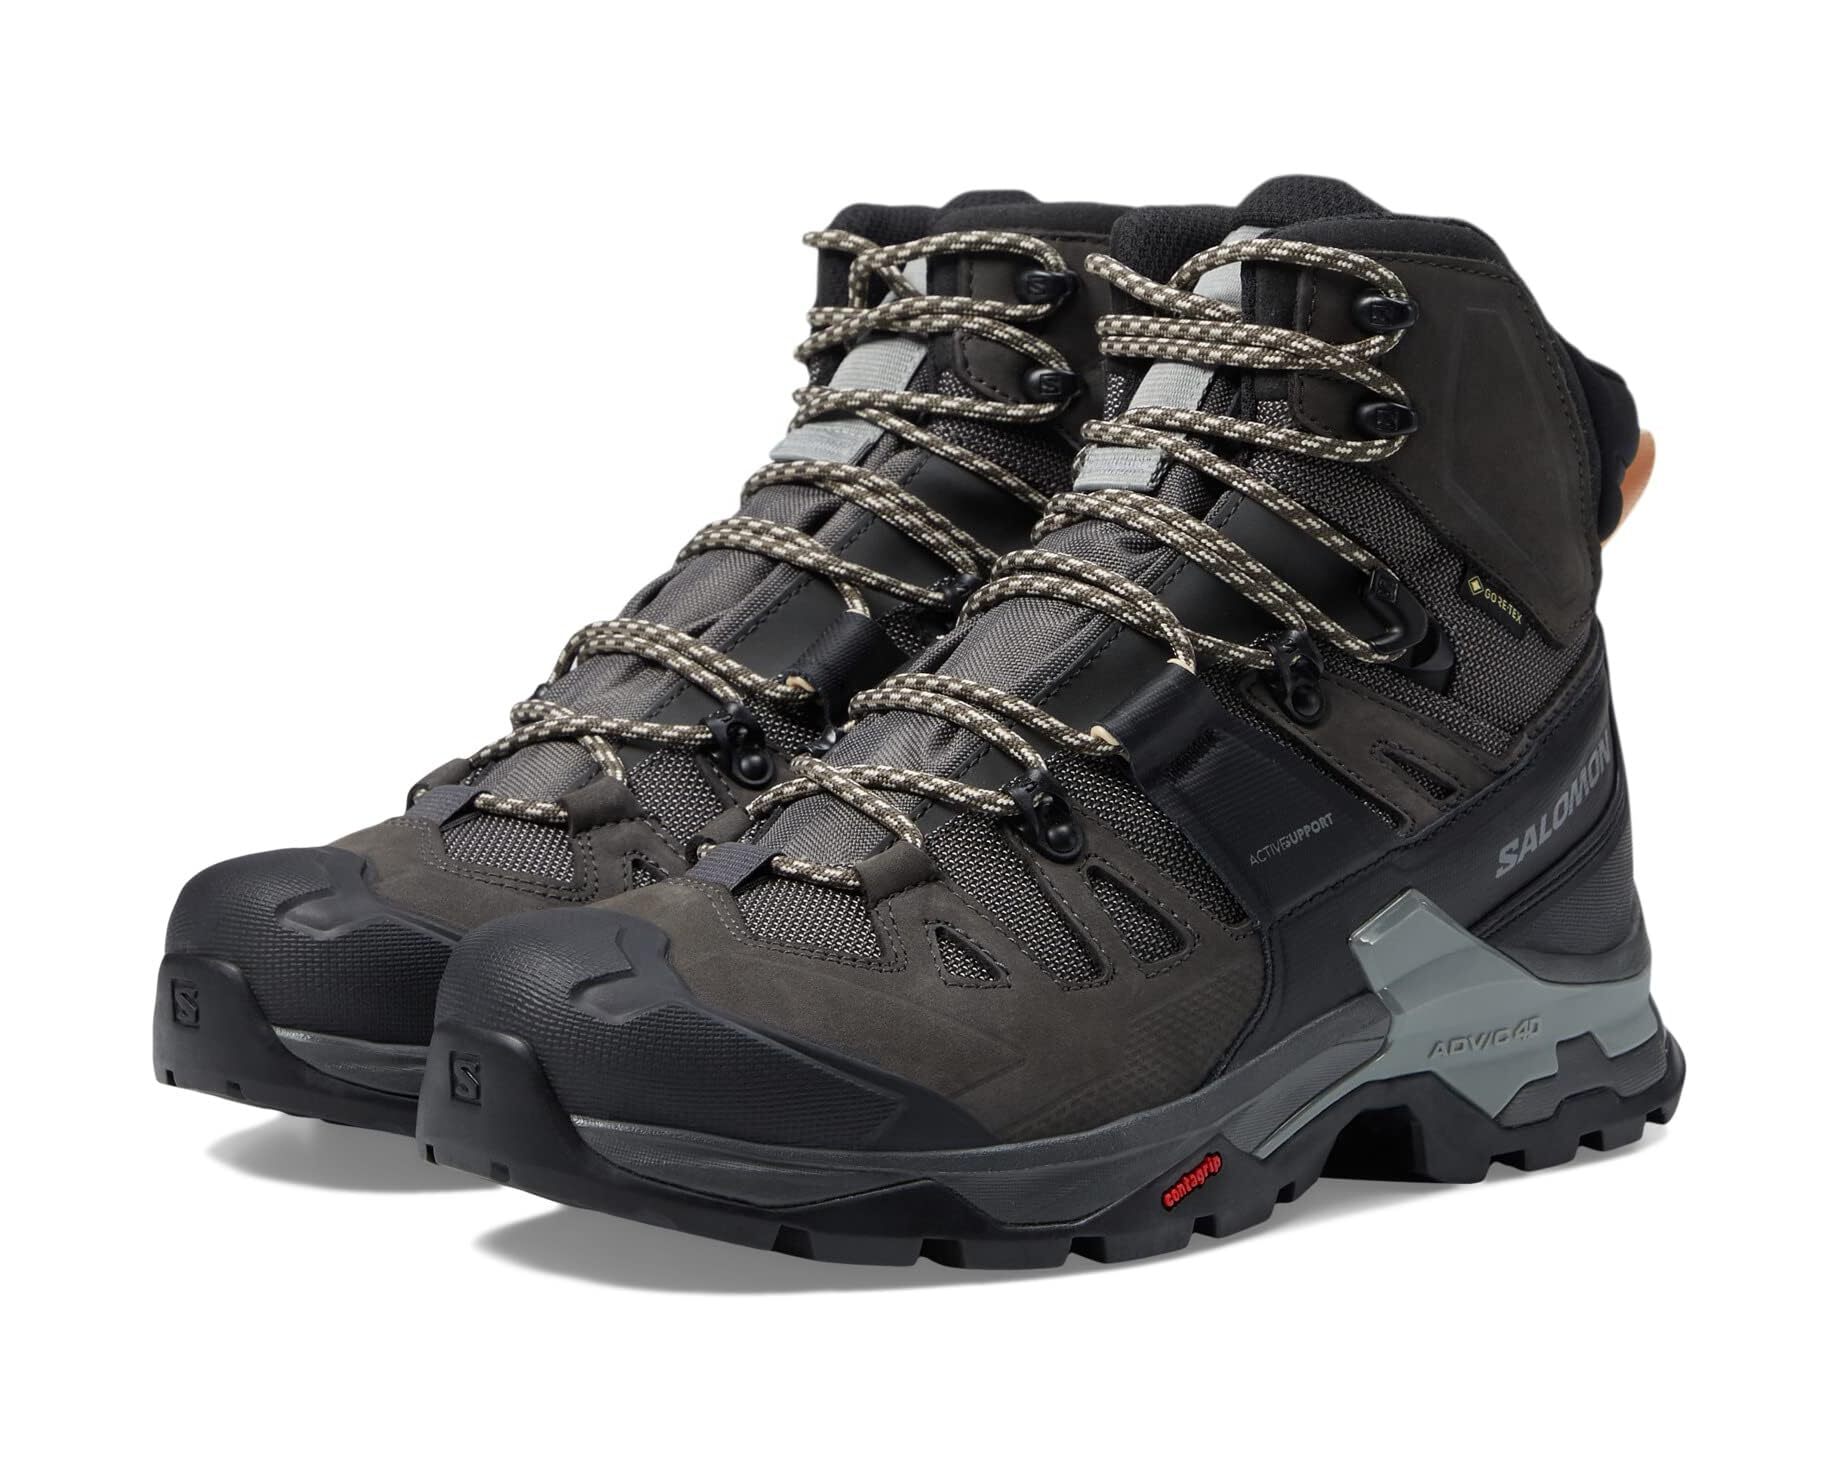 Pair of Salomon hiking boots displayed on a white background